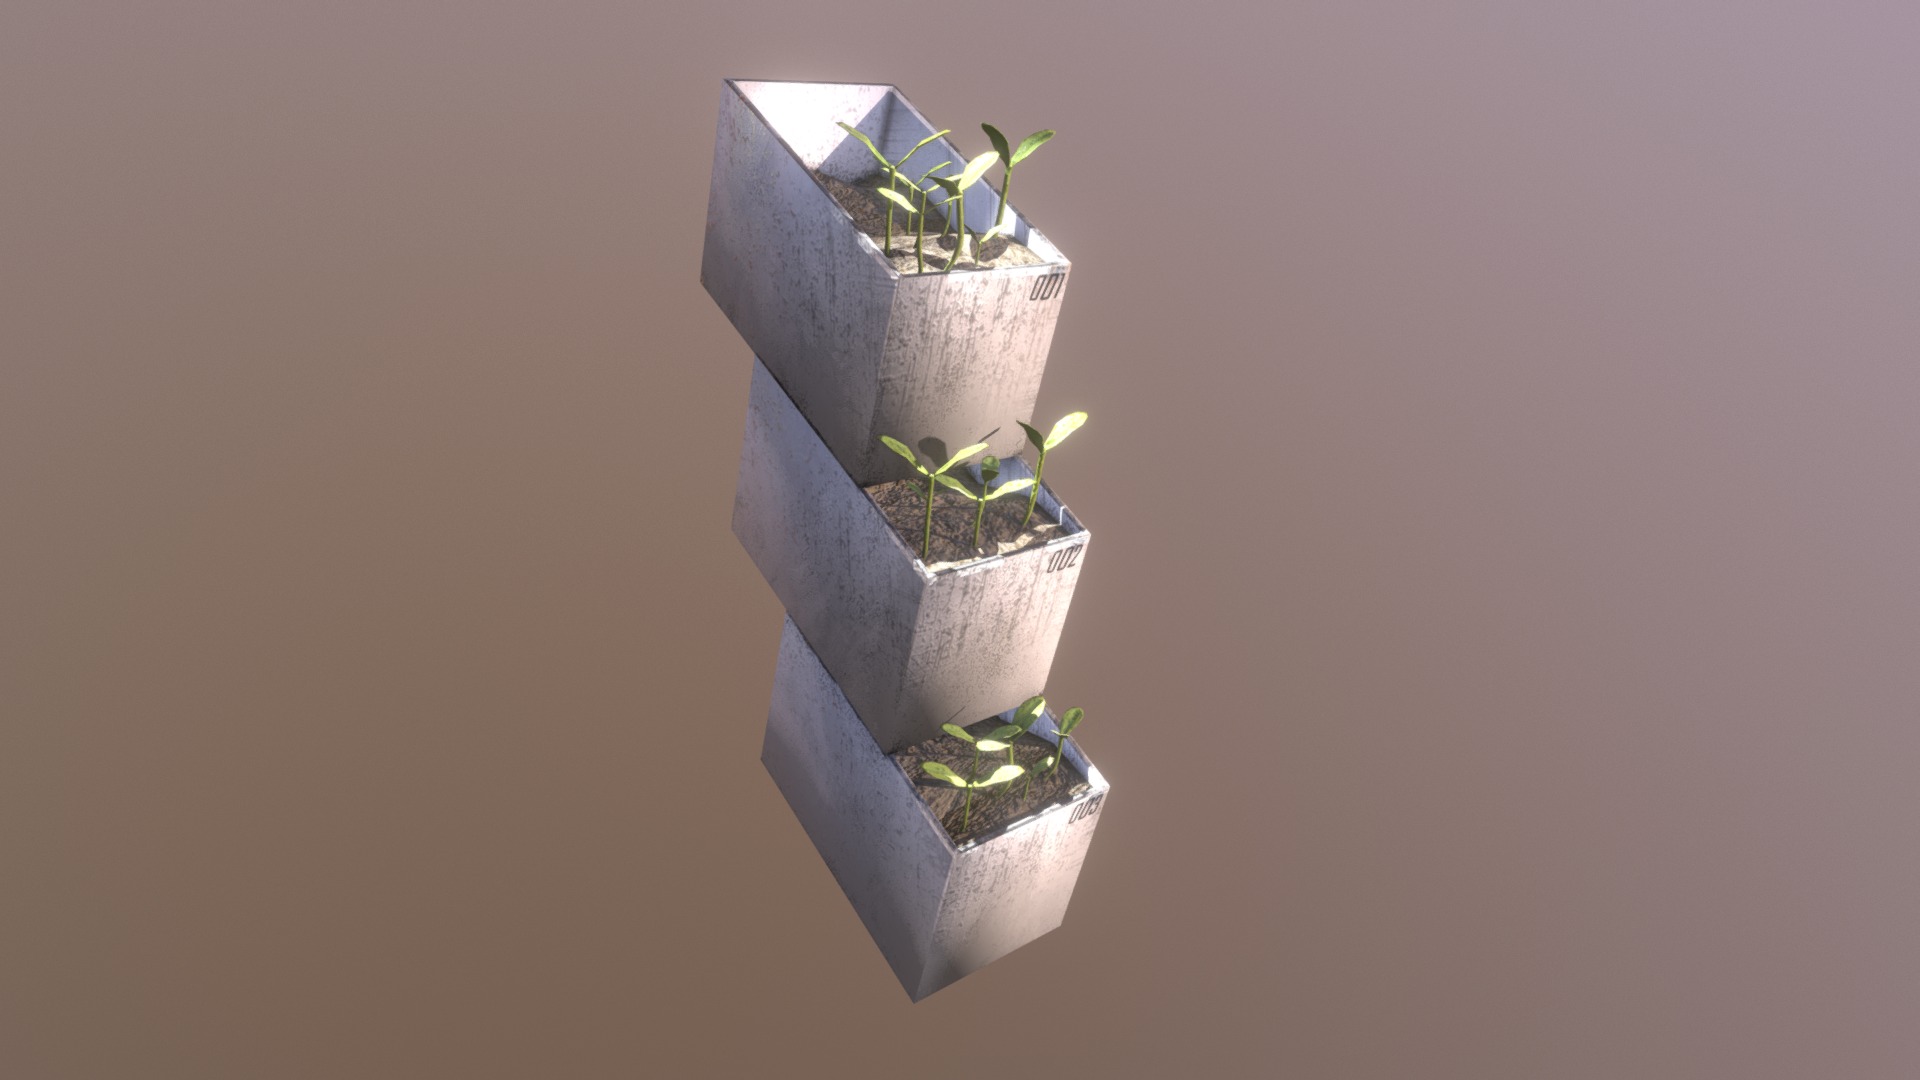 3D model Vertical Farm Component - This is a 3D model of the Vertical Farm Component. The 3D model is about a planter with plants in it.